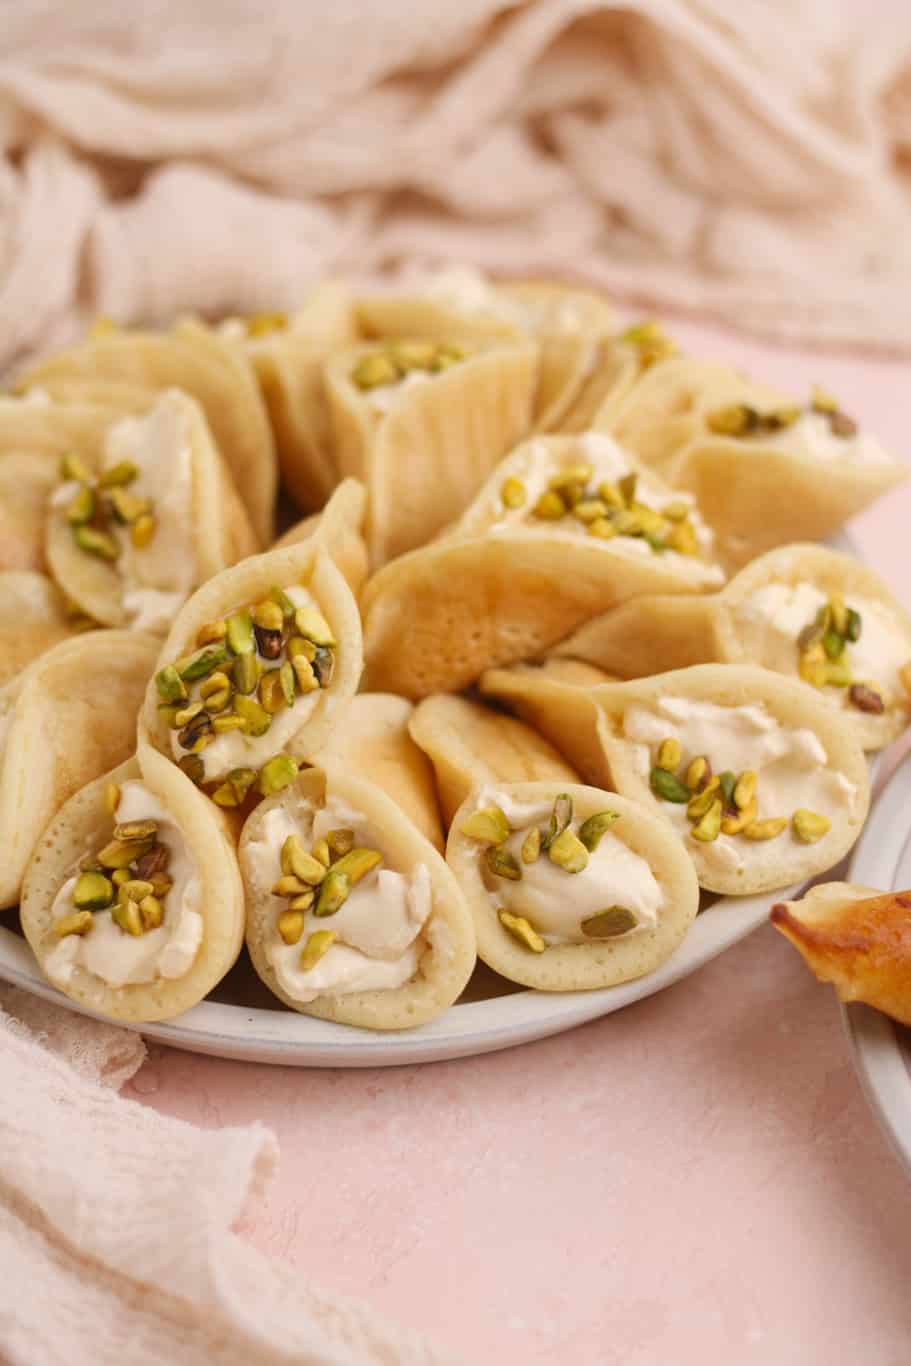 a plate of qatayef asafiri stuffed with sweetened ashta filling and topped with crushed pistachios ready to be served